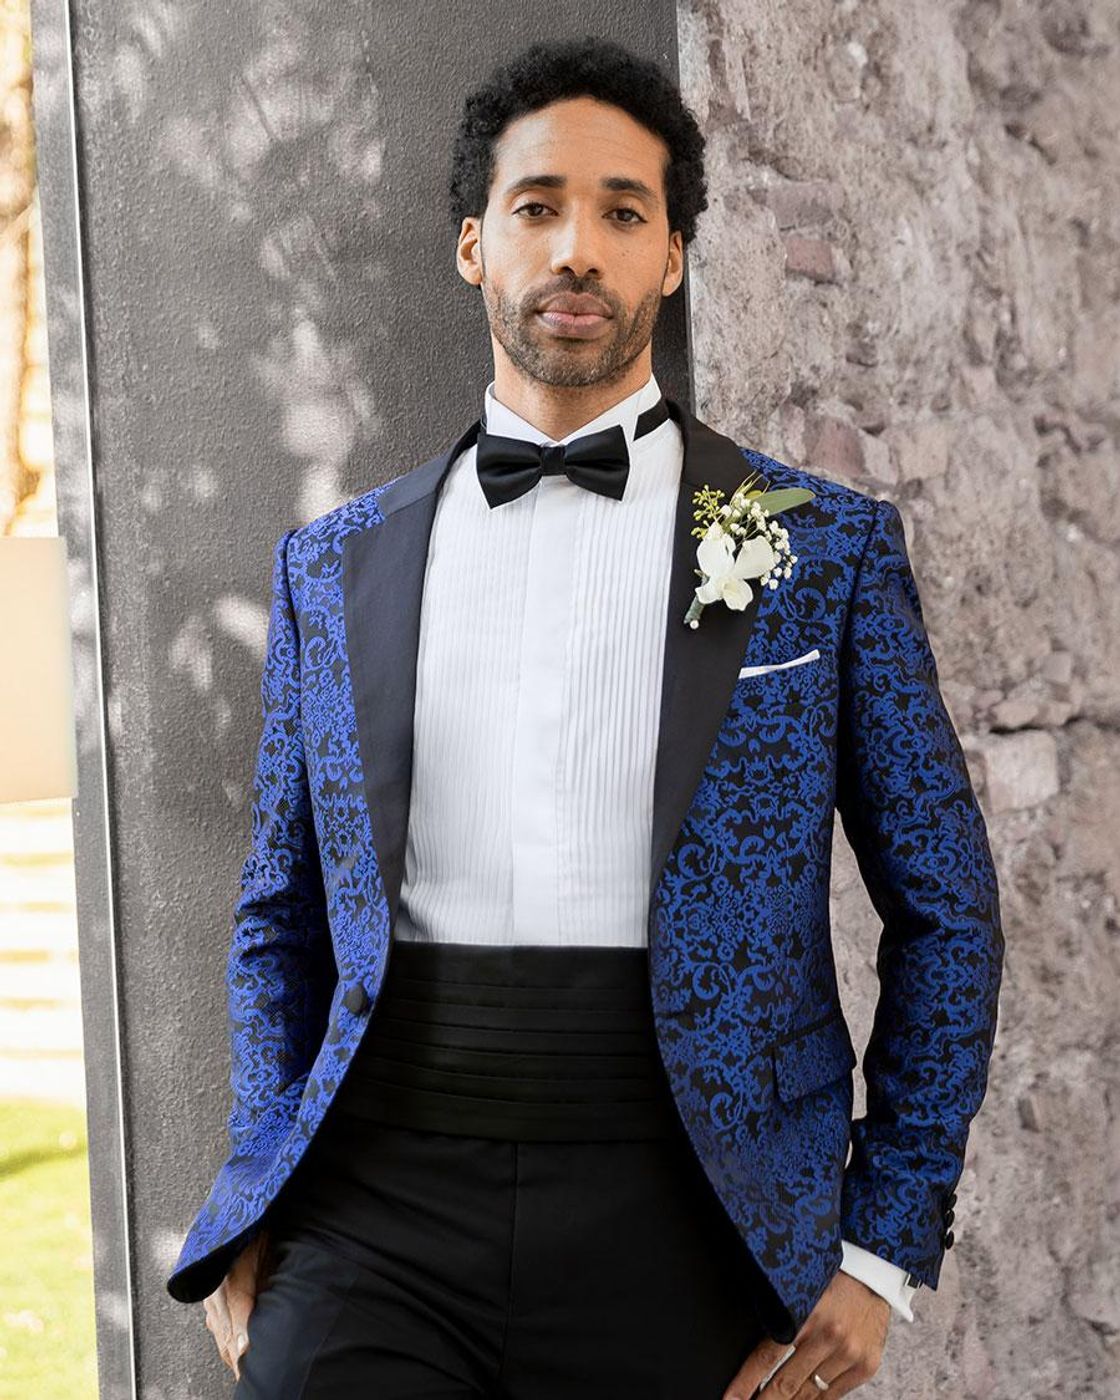 Suiting Up for the Special Day: A Men's Wedding Attire Guide